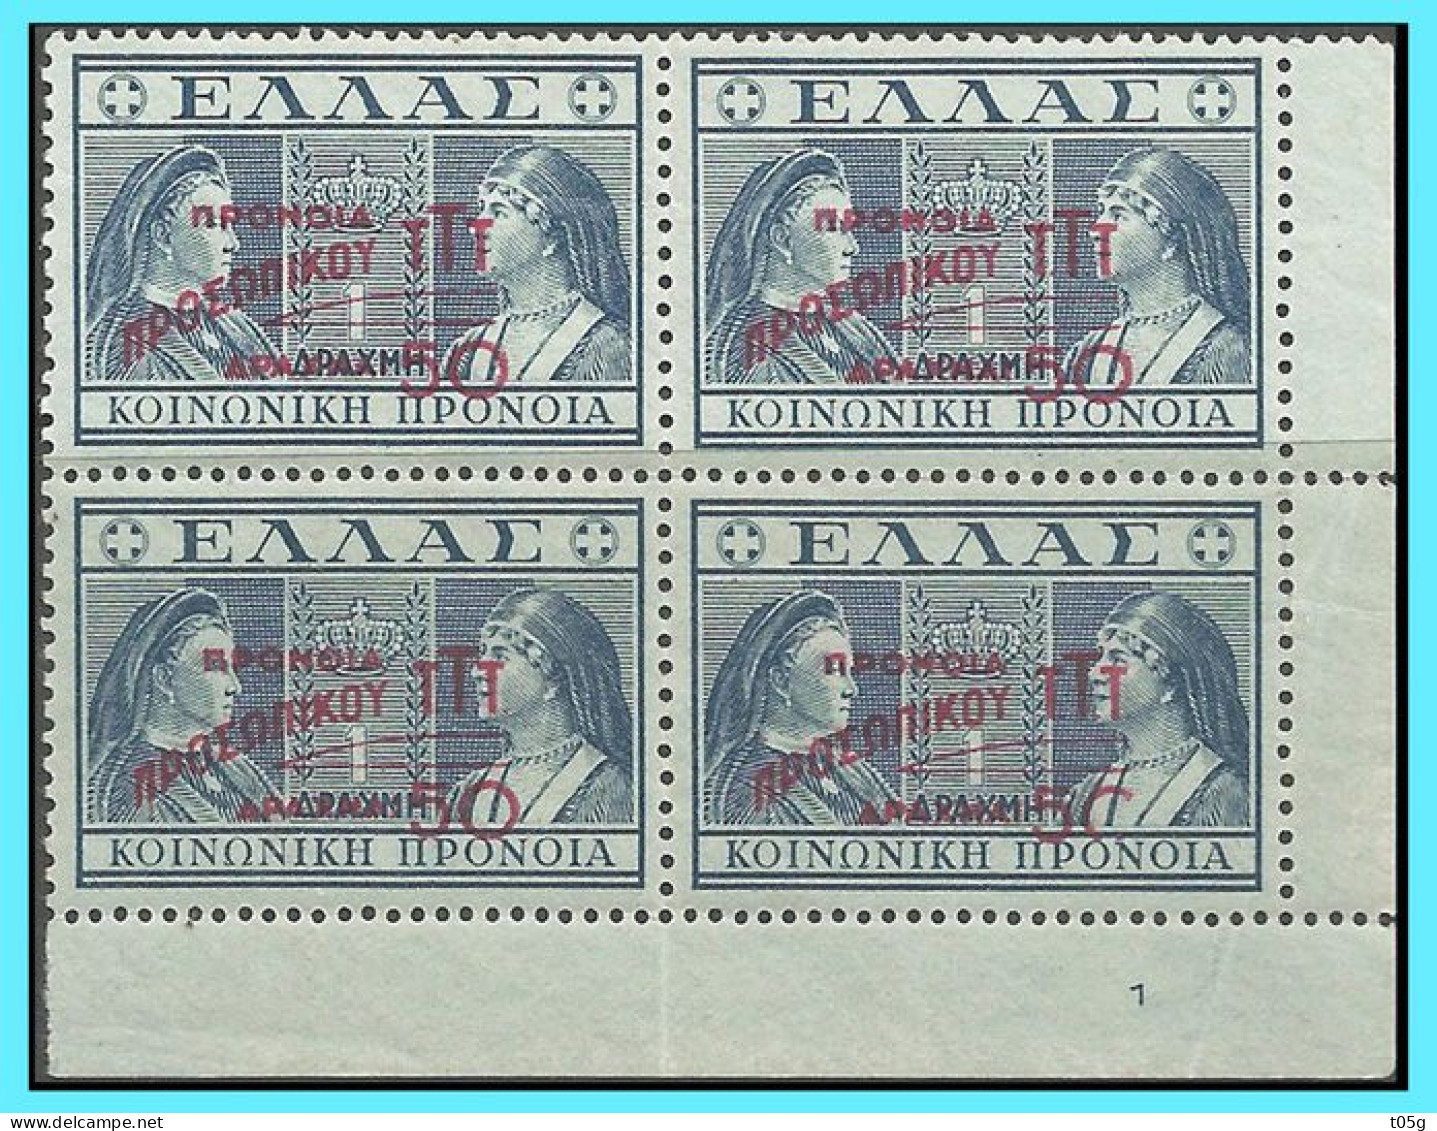 GREECE-GRECE - HELLAS 1946-50:  10drx / 50L Charity Stamps (with delcaque overprint) Block/4  Set MNH** - Beneficenza